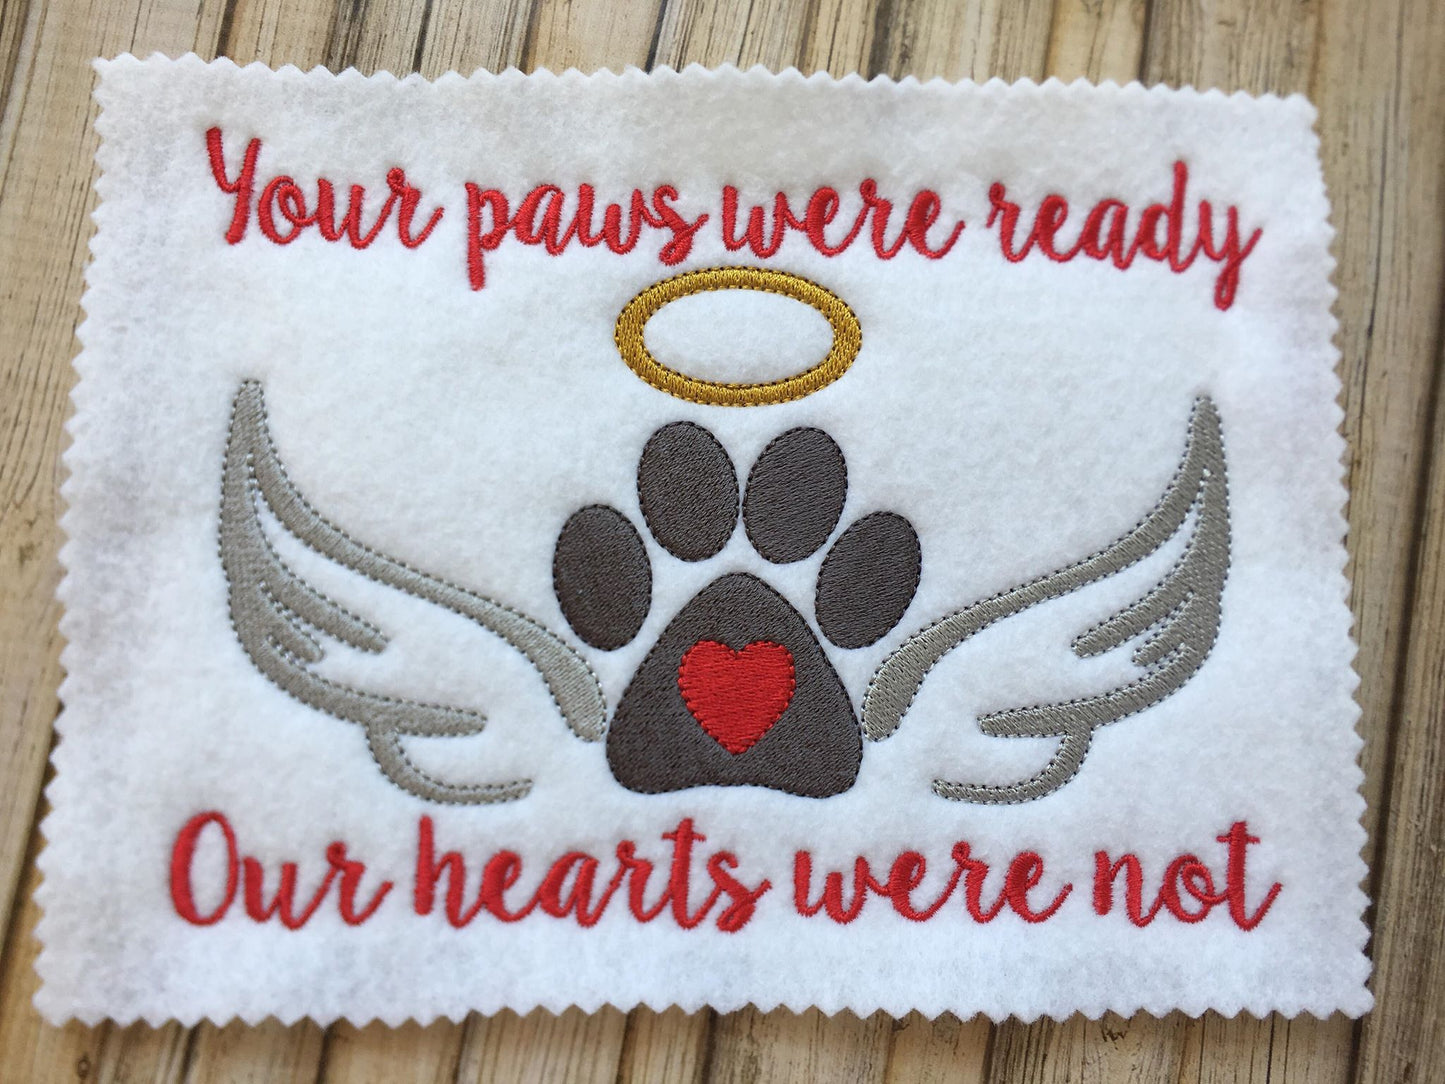 Paws were ready, but our hearts were not - 5 x 7 - Embroidery Design - DIGITAL Embroidery DESIGN